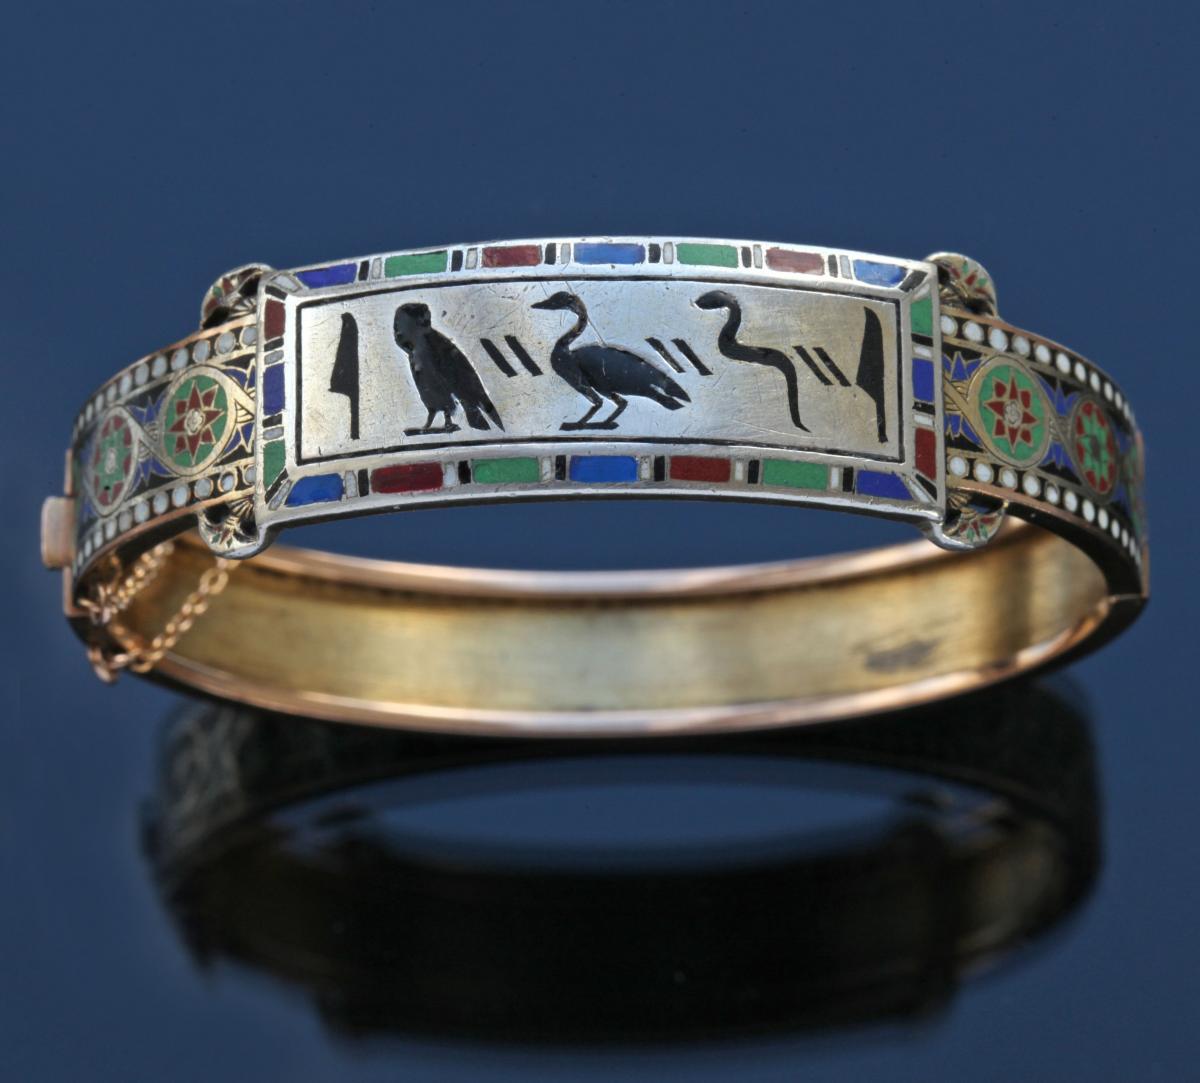 EMILE-DÉSIRÉ PHILIPPE 1834-C.1880 (1834-c.1880) Early Egyptian Revival Antique Hinged Bangle